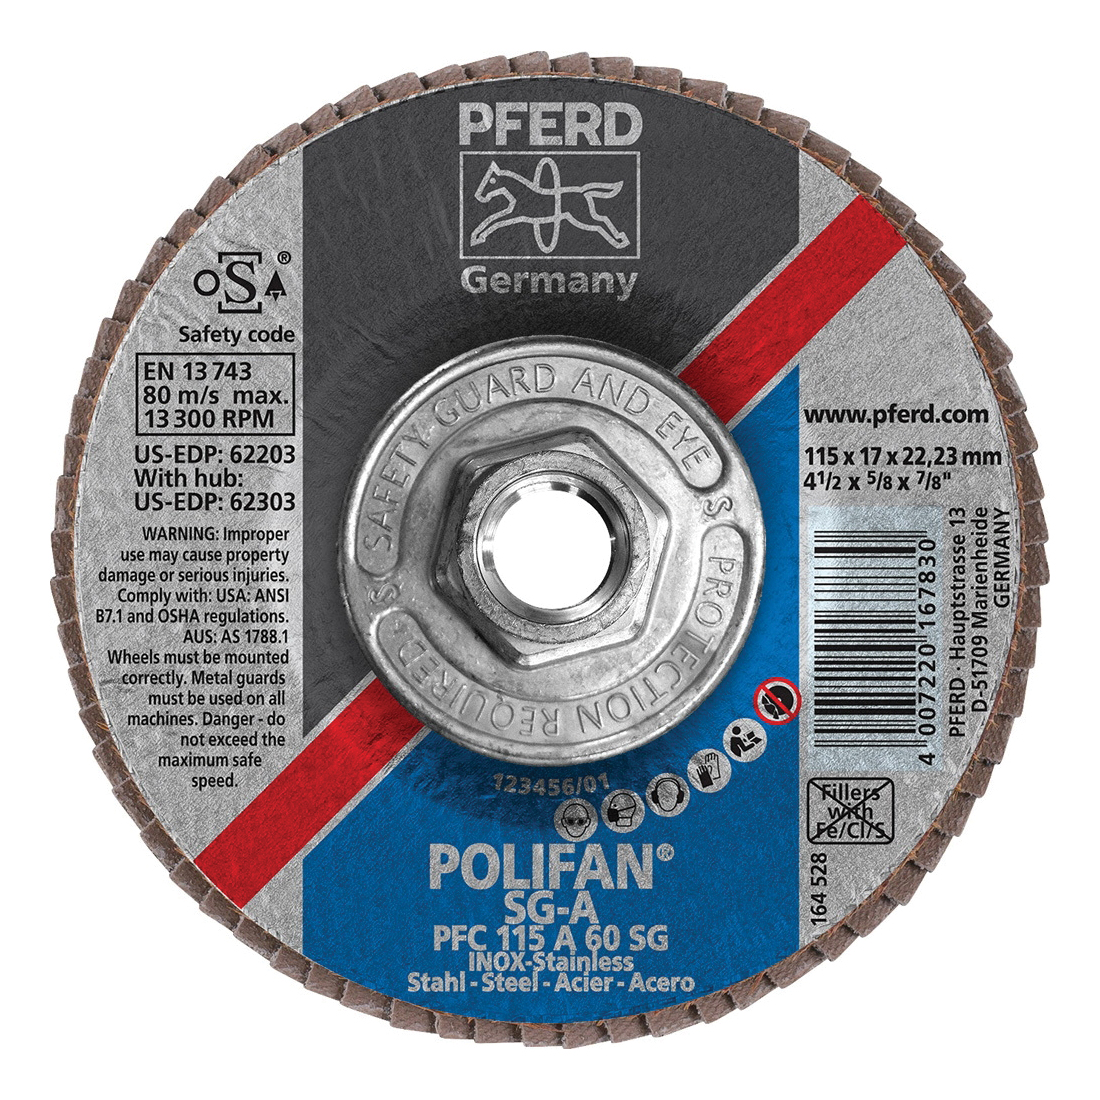 PFERD Polifan® 62303 Performance Line SG A Threaded Coated Abrasive Flap Disc, 4-1/2 in Dia, 60 Grit, Aluminum Oxide Abrasive, Type 29 Conical Disc